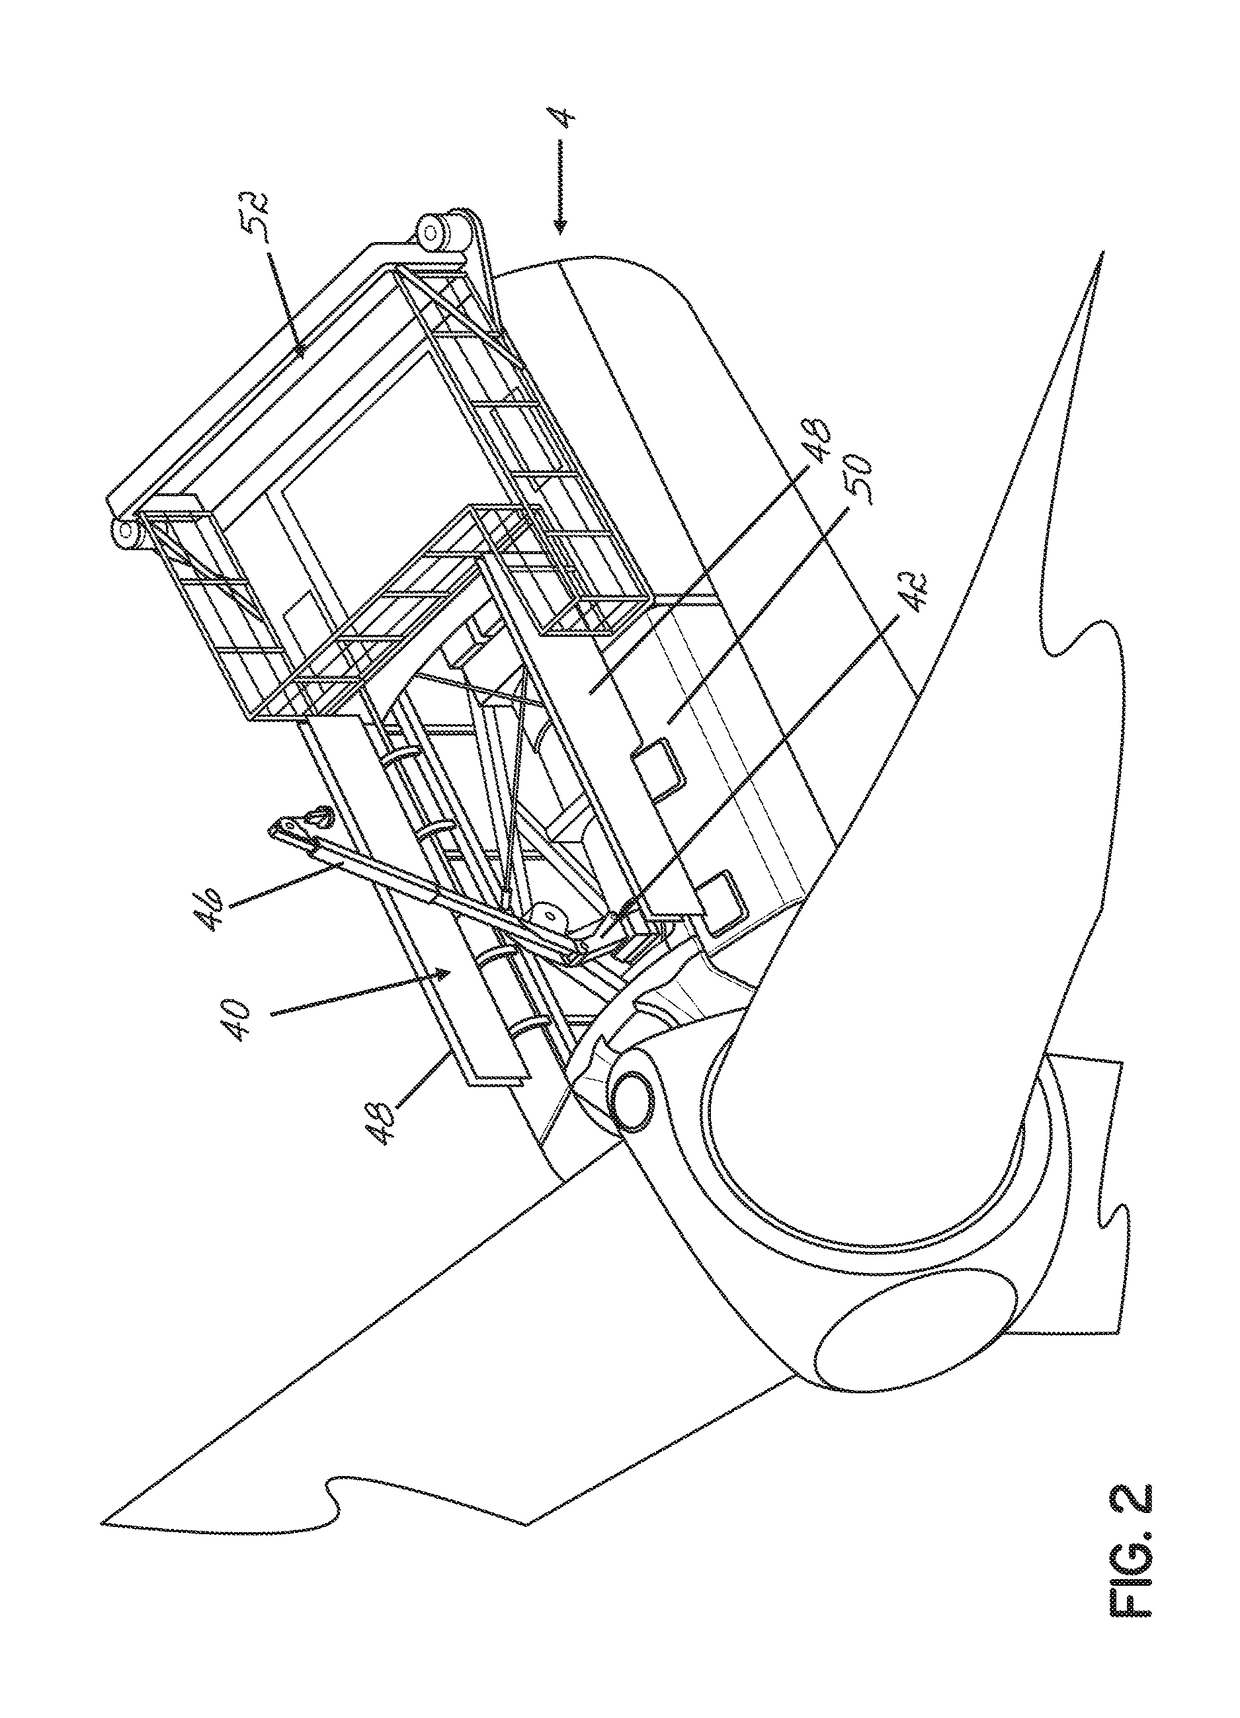 Nacelle for a wind turbine generator including lifting apparatus